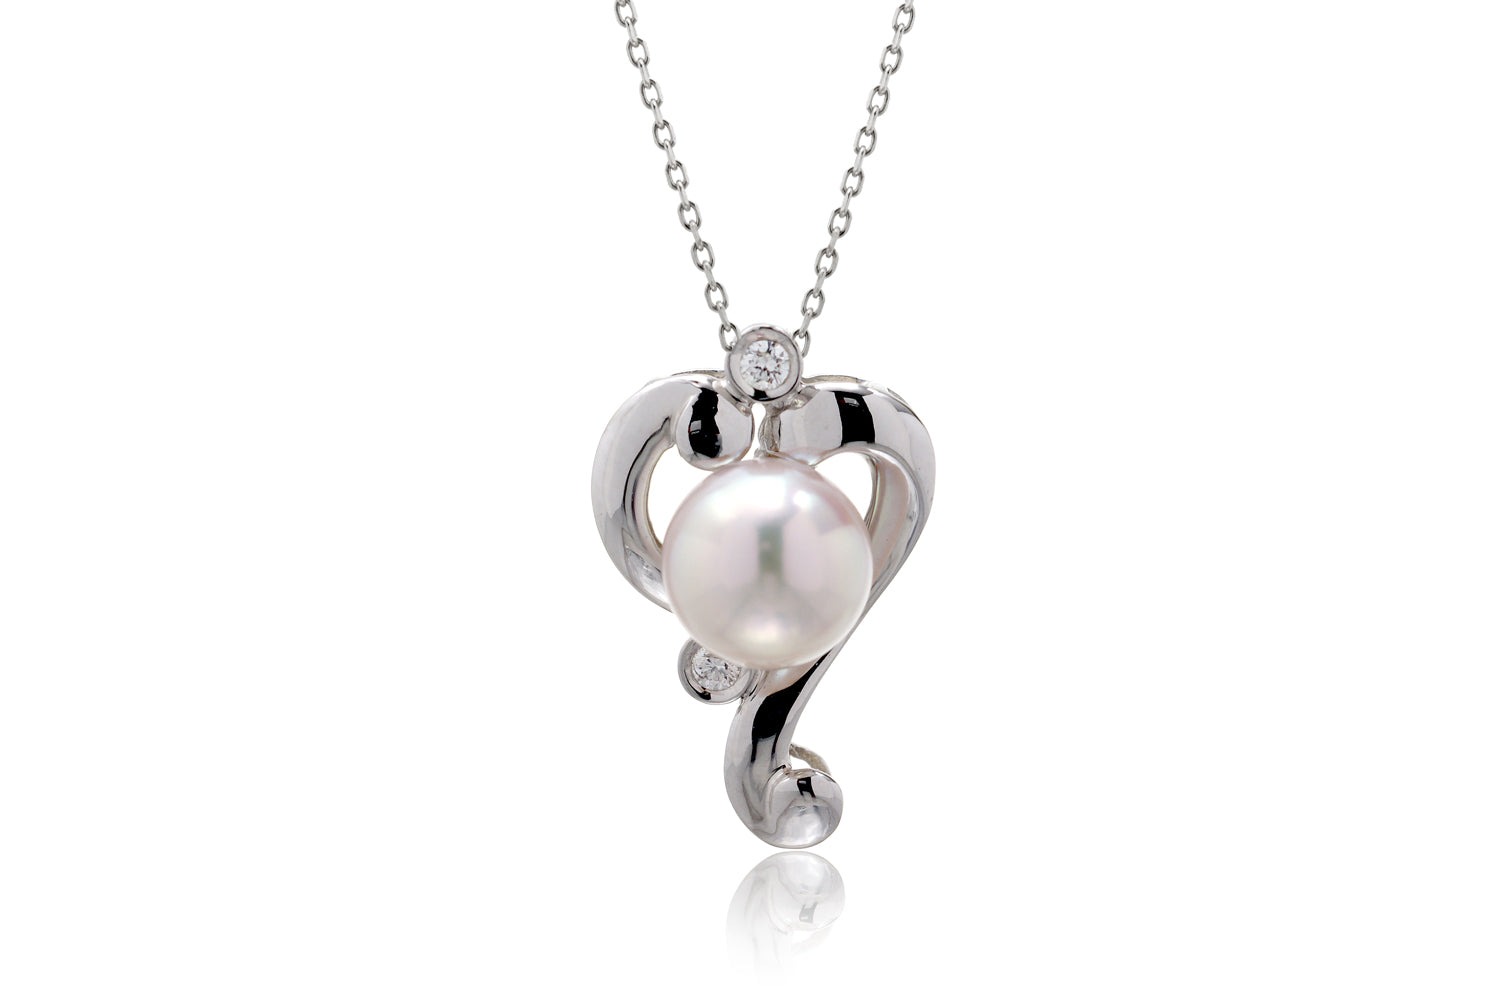 The Heart Pearl Pendant (7.5mm)